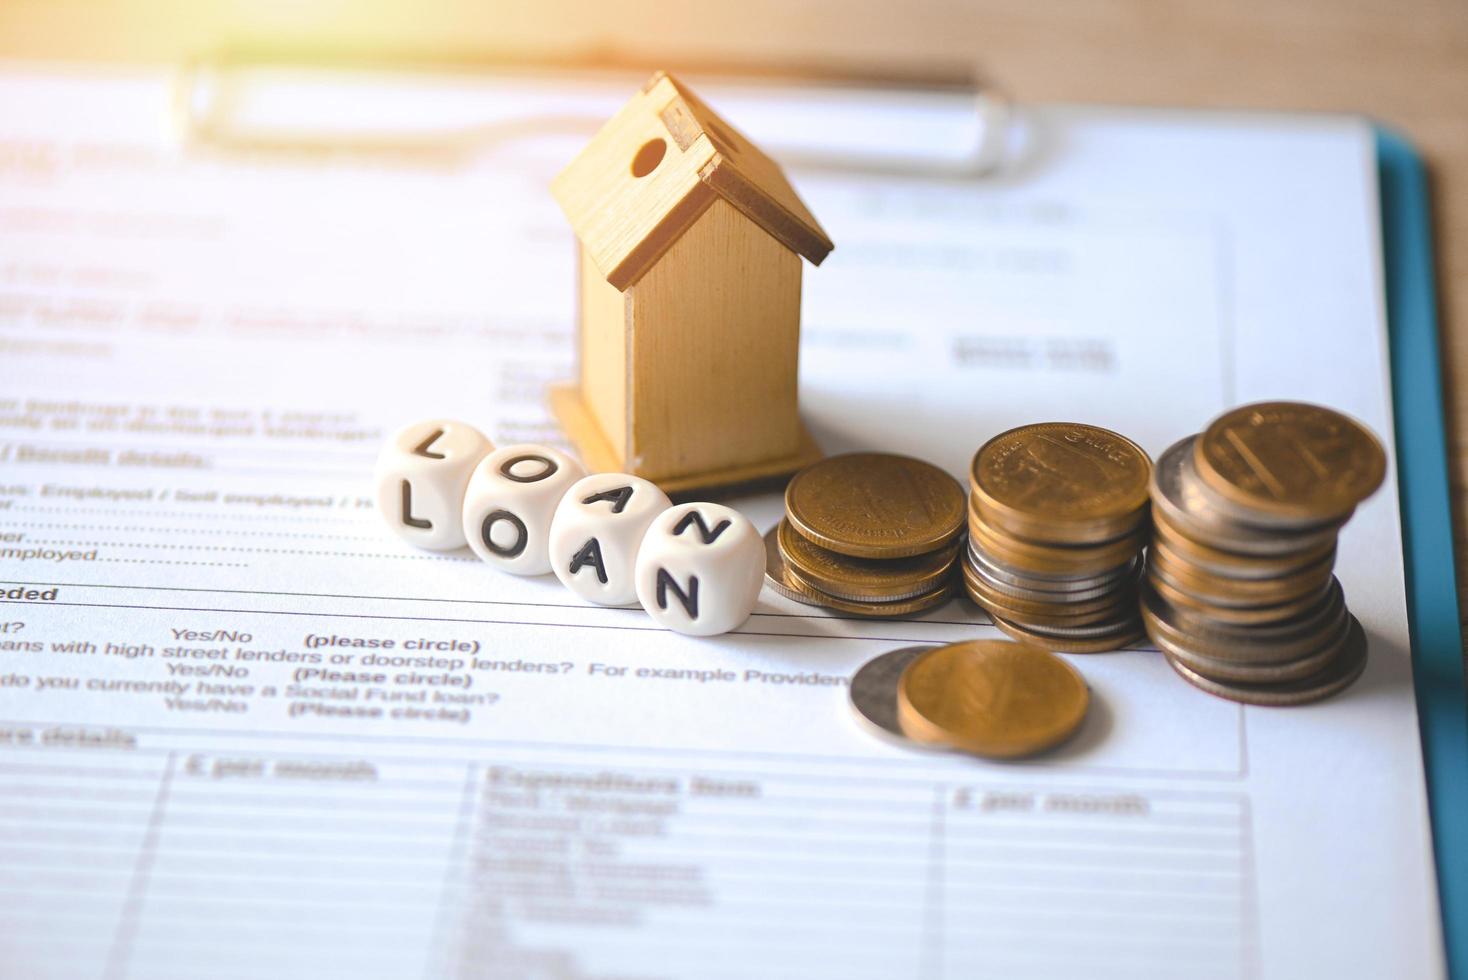 Home loan concept, Loan application form paper with money coin and loan house model on table, Loan business finance economy commercial real estate investments concept photo